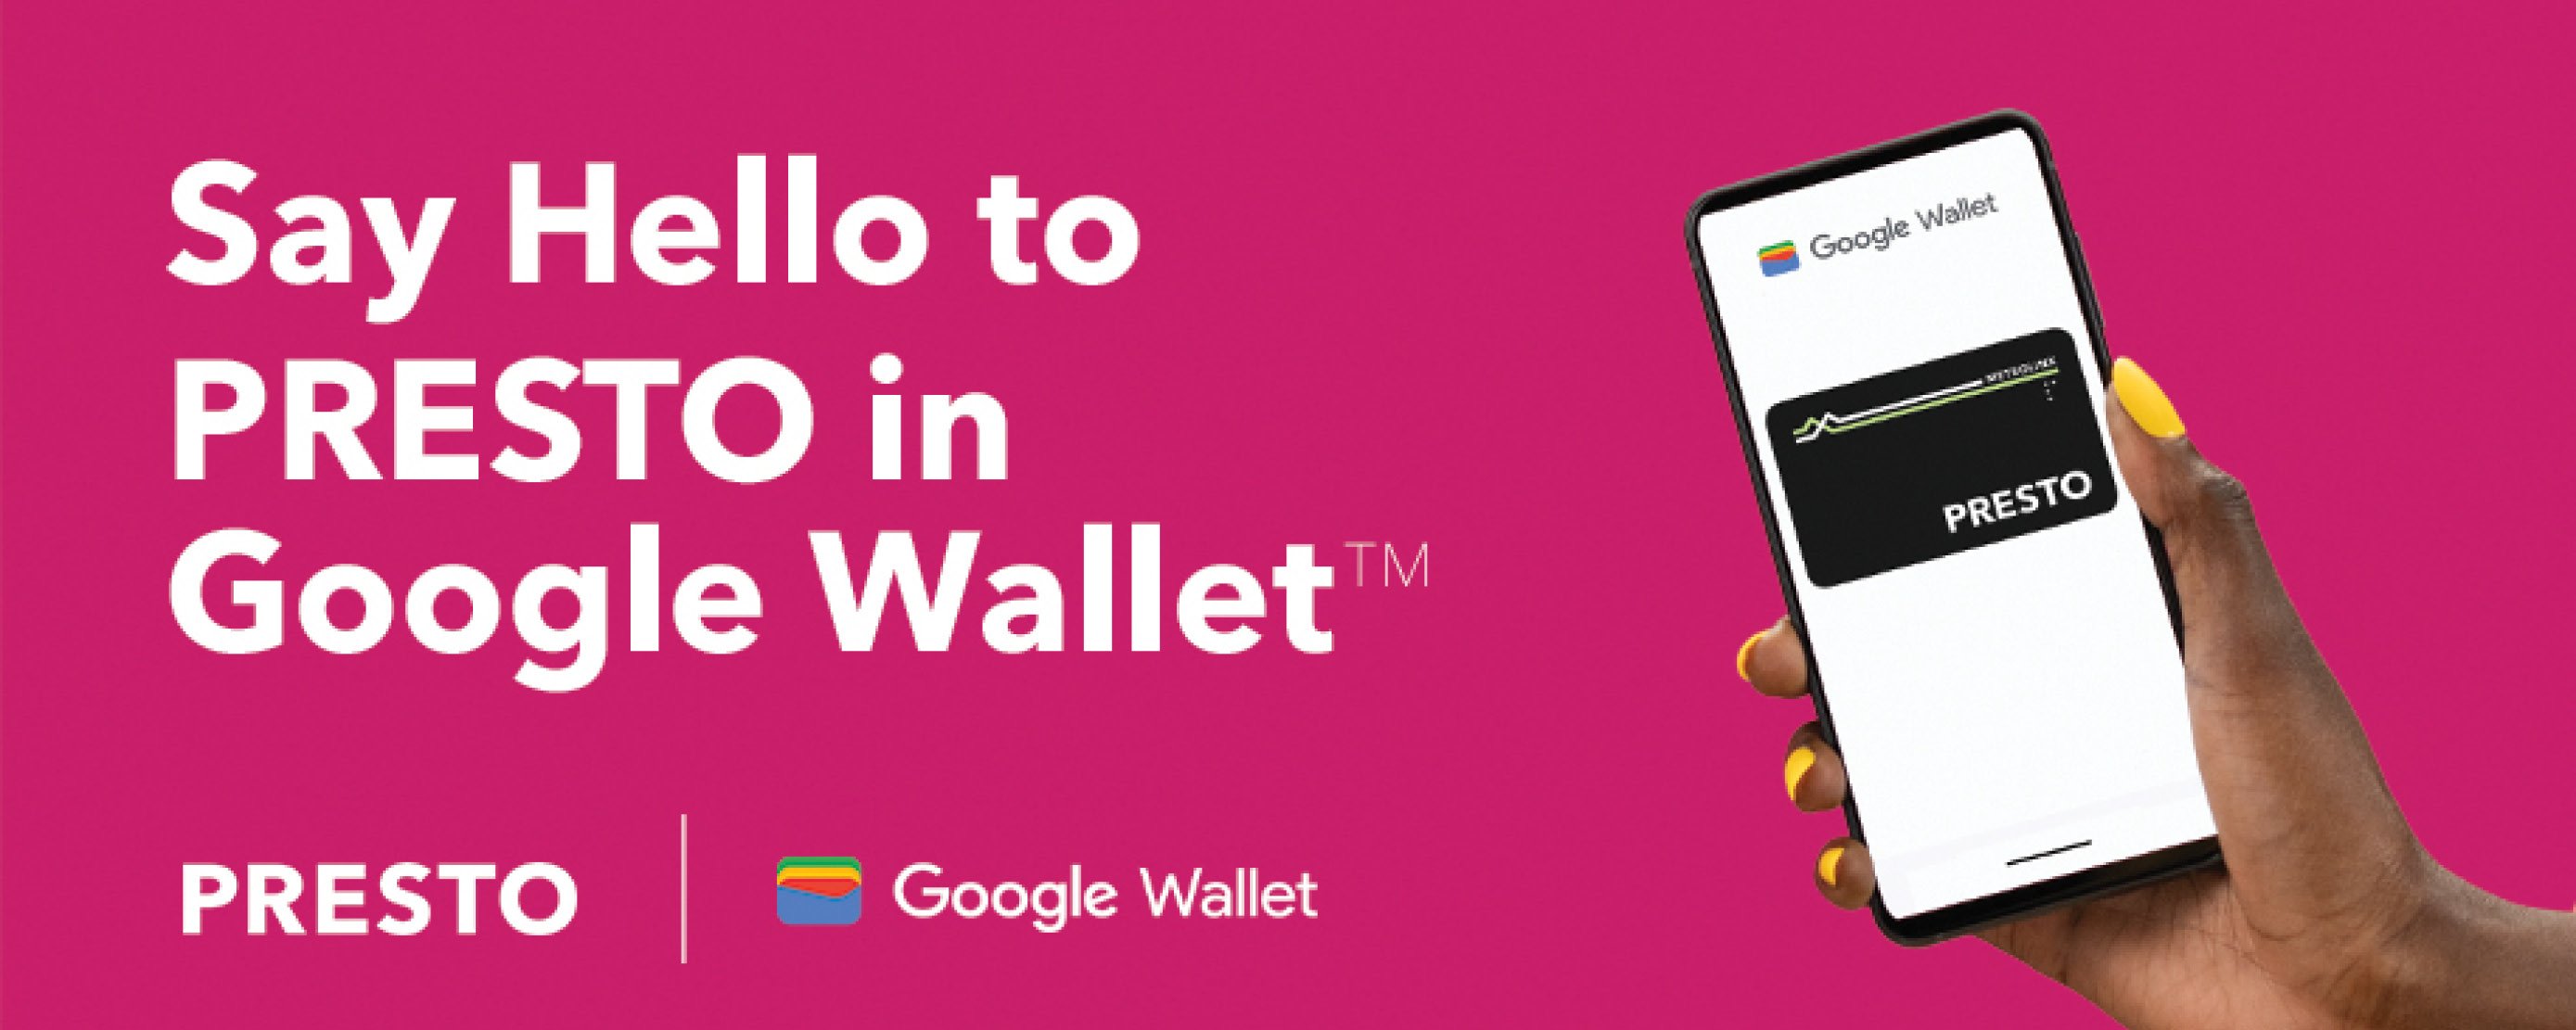 Hand holding a mobile phone showing PRESTO on mobile wallet with text: Say Hello to PRESTO in Google Wallet